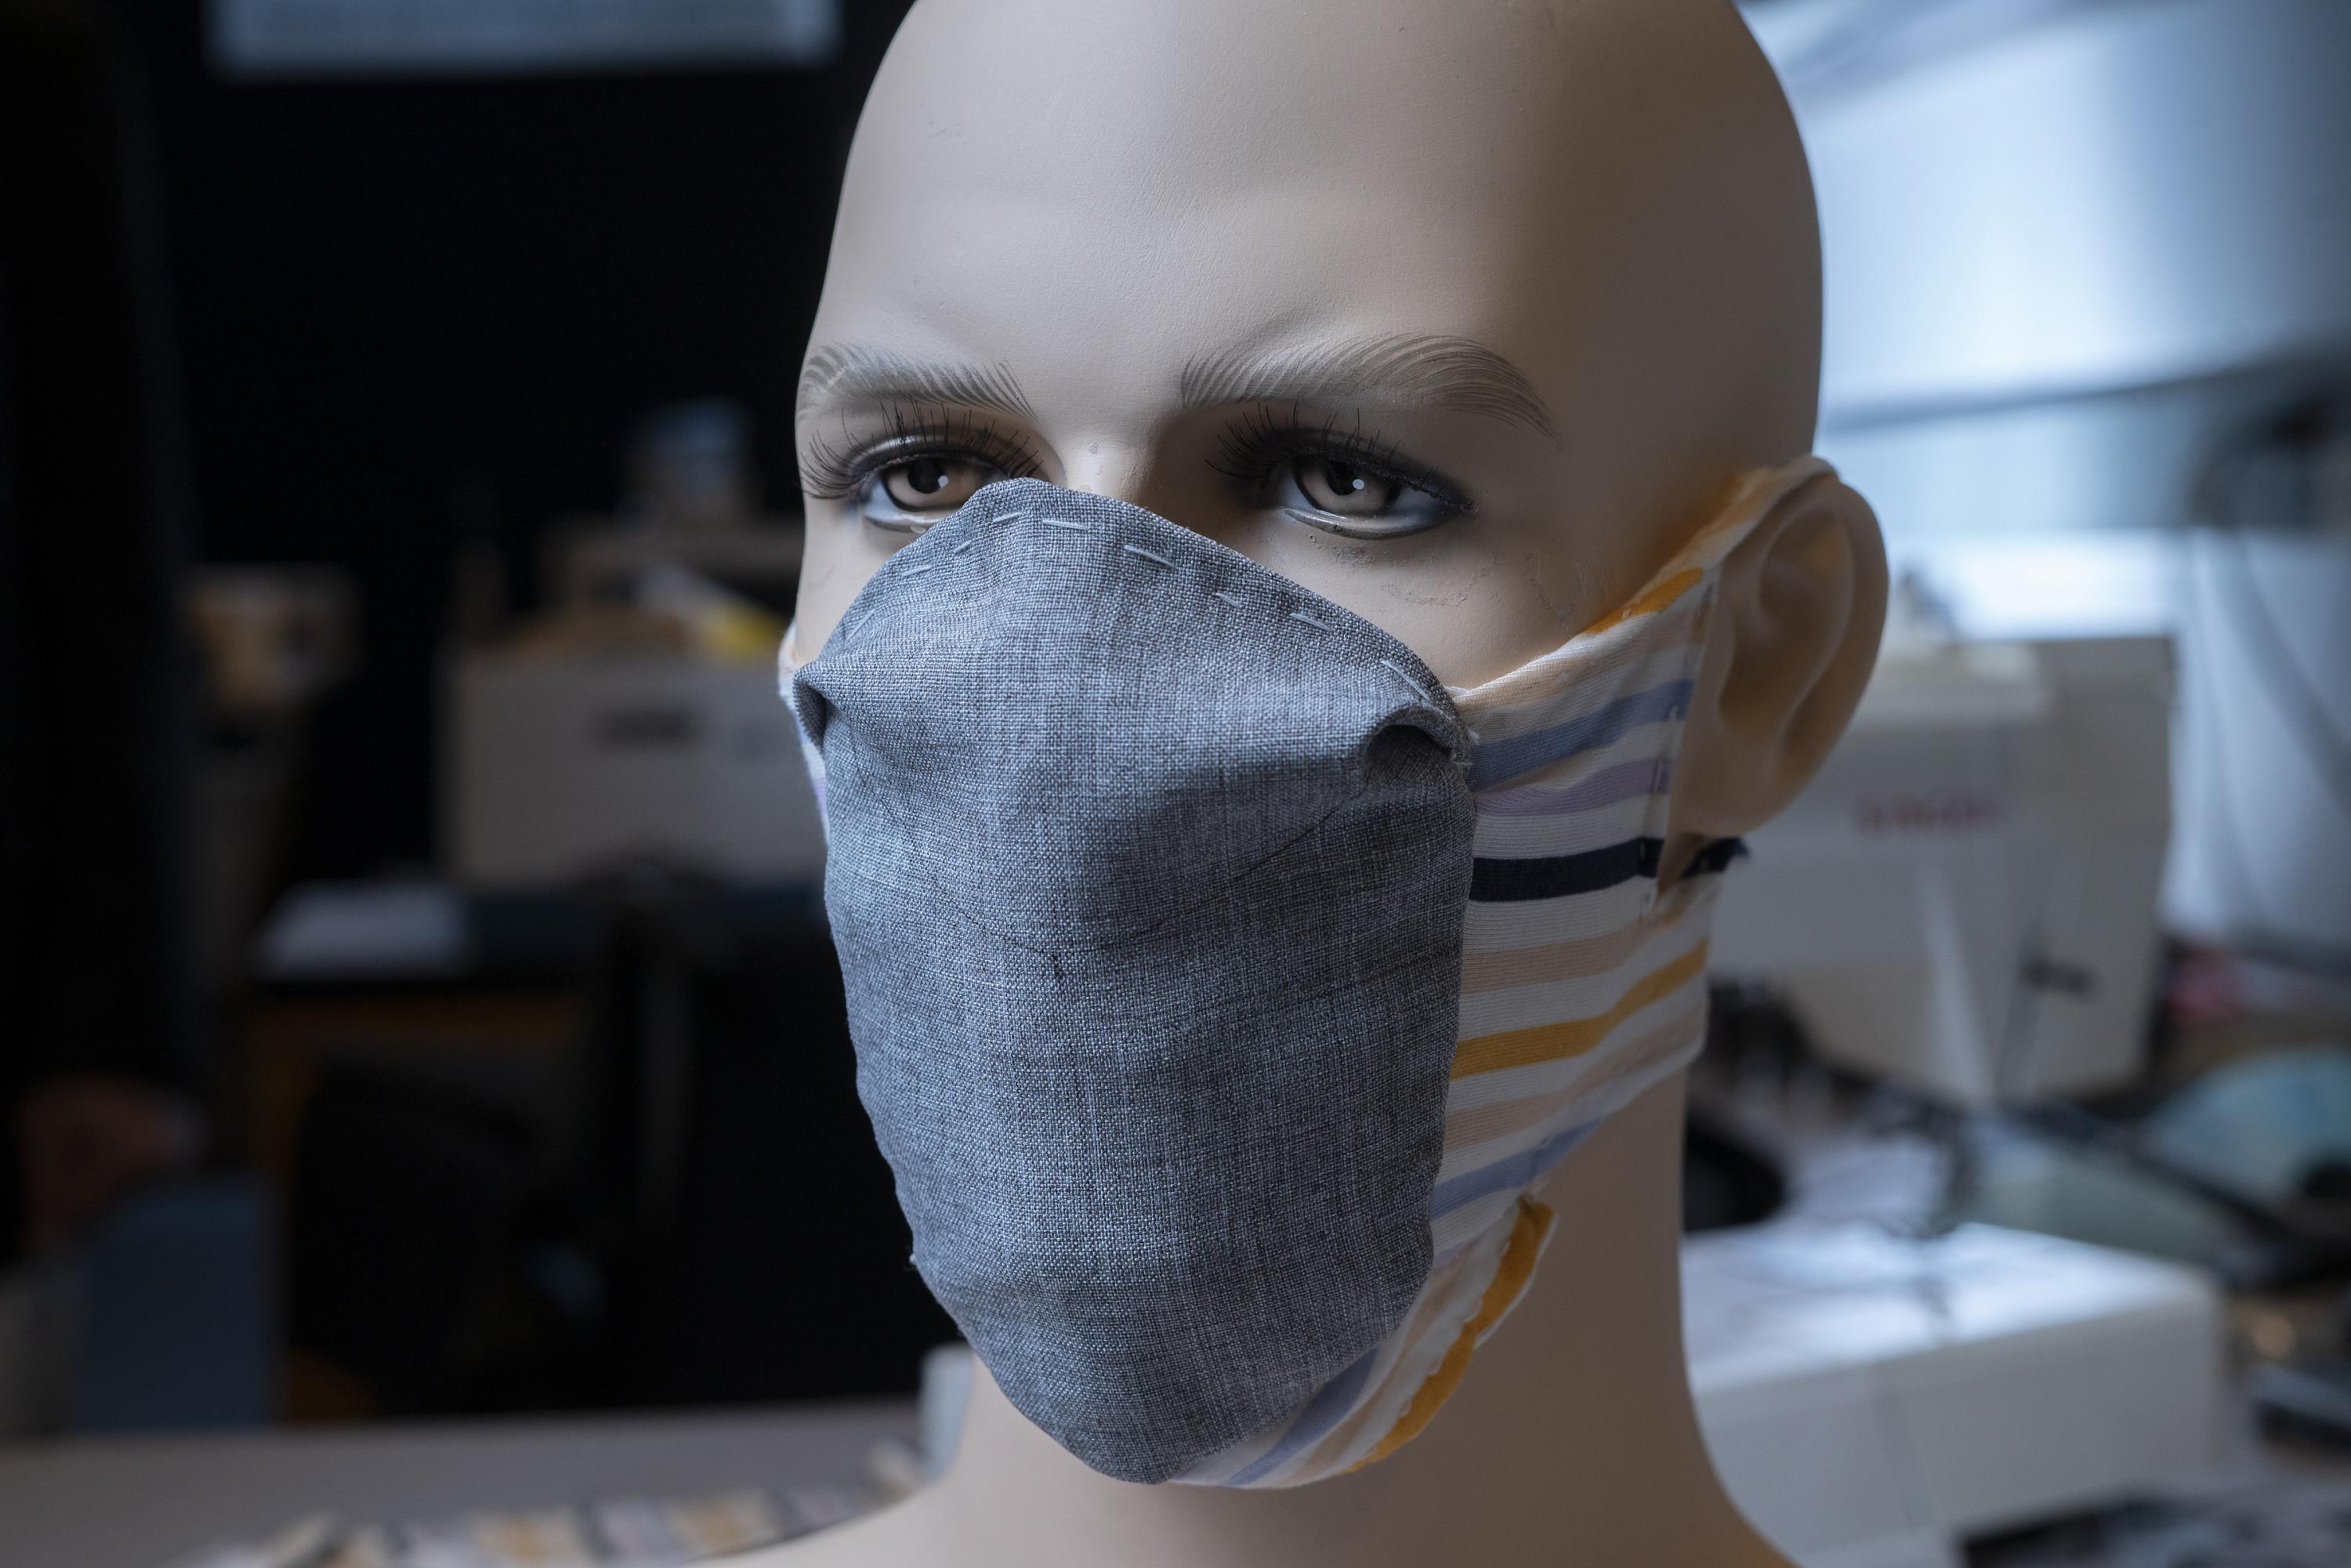 Researchers Redesign the Face Mask to Improve Comfort and News Center